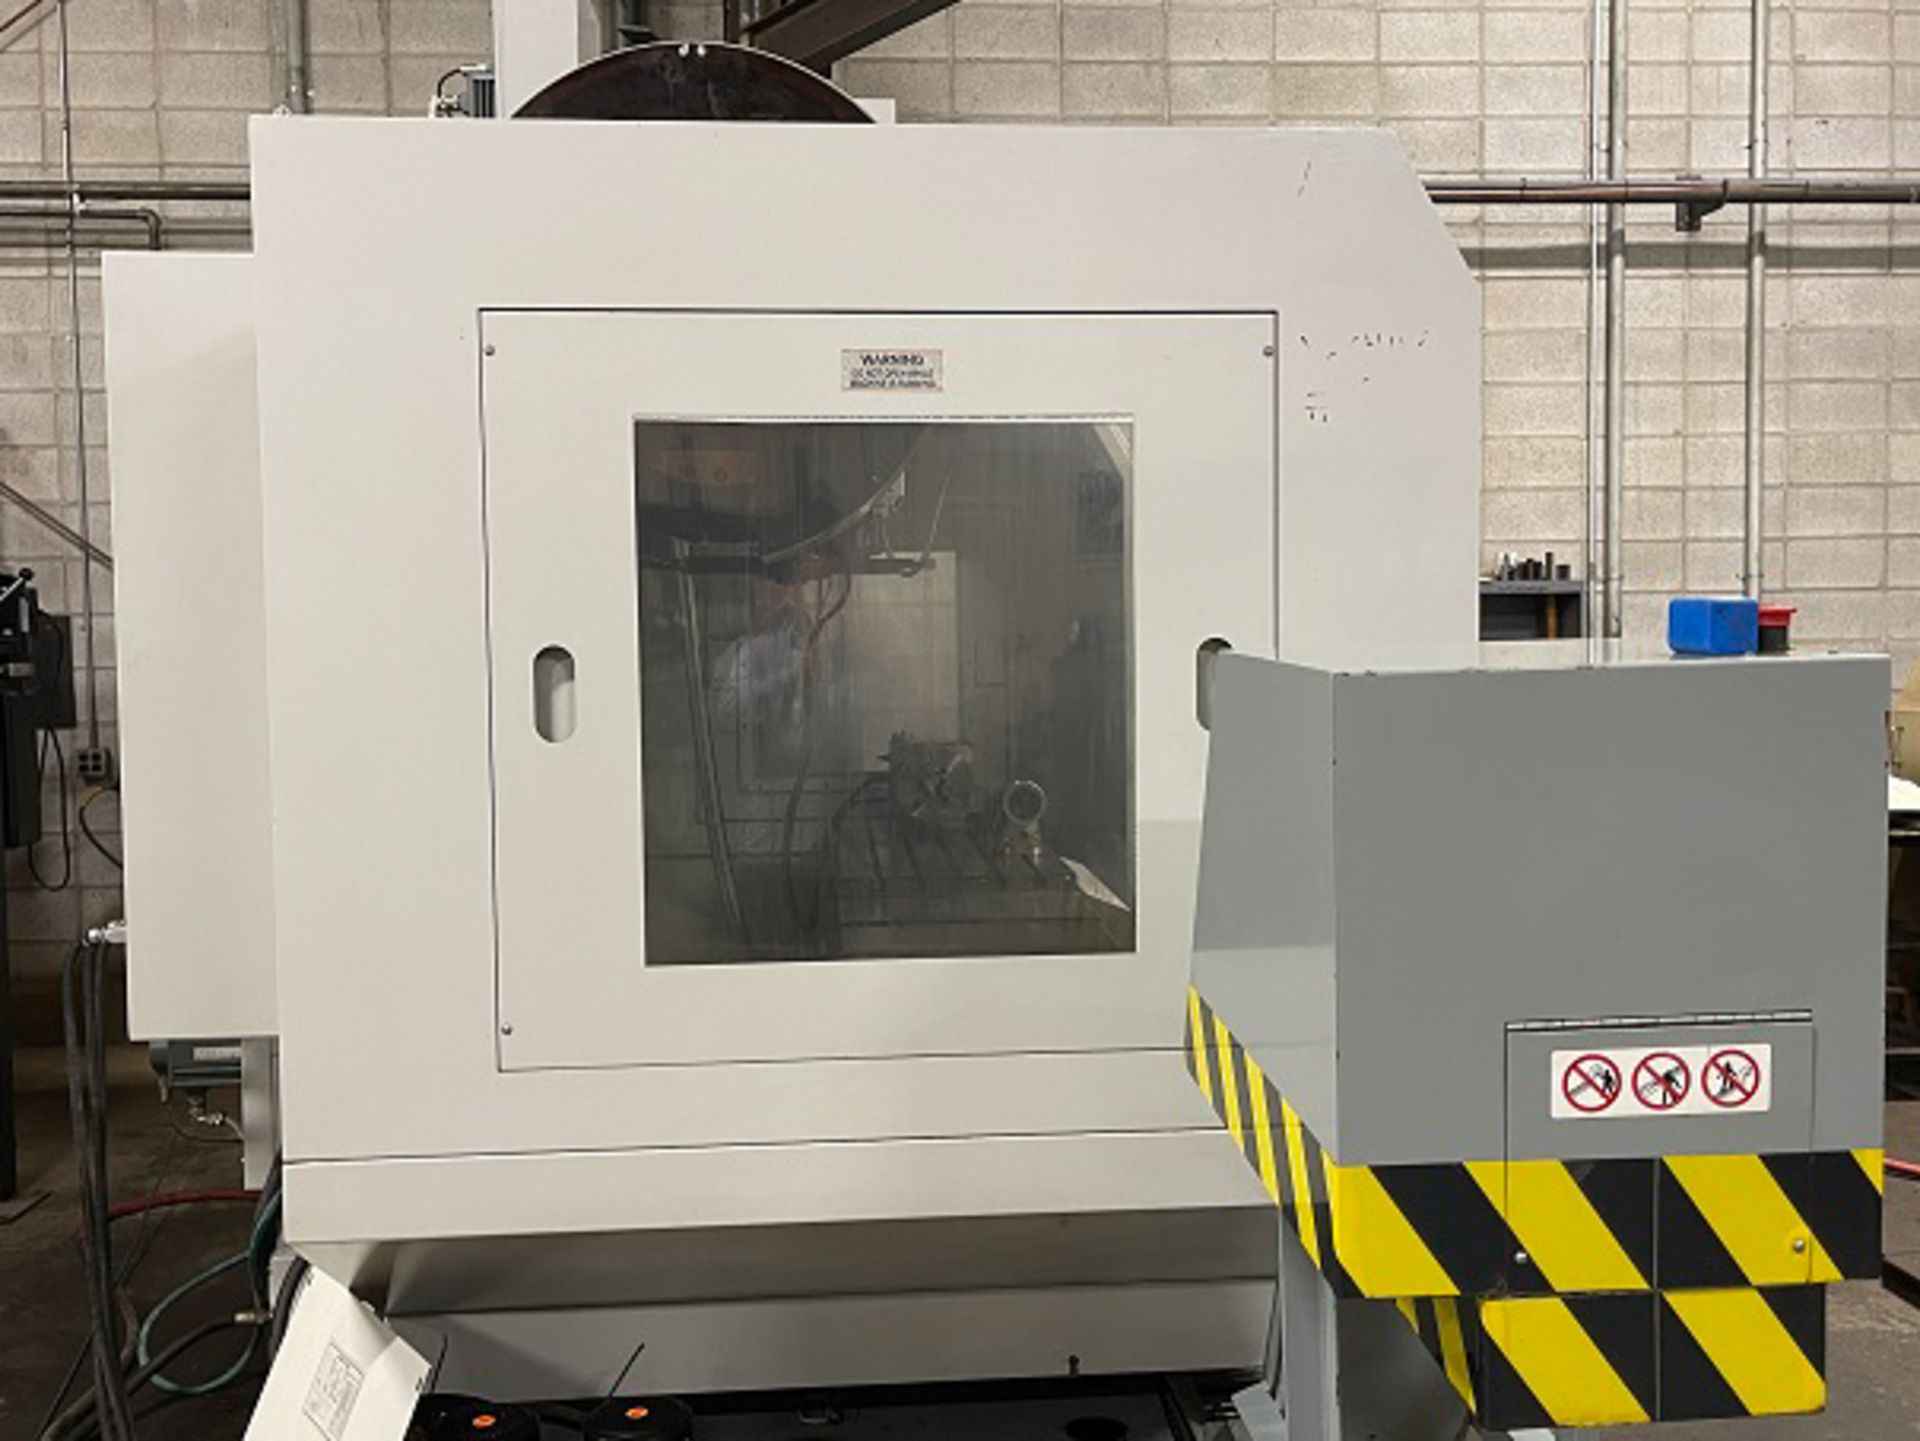 MODERN (2004) VM-1000 HIGH SPEED CNC VERTICAL MACHINING CENTER WITH FAGOR 8055M CNC CONTROL, 19" X - Image 18 of 23